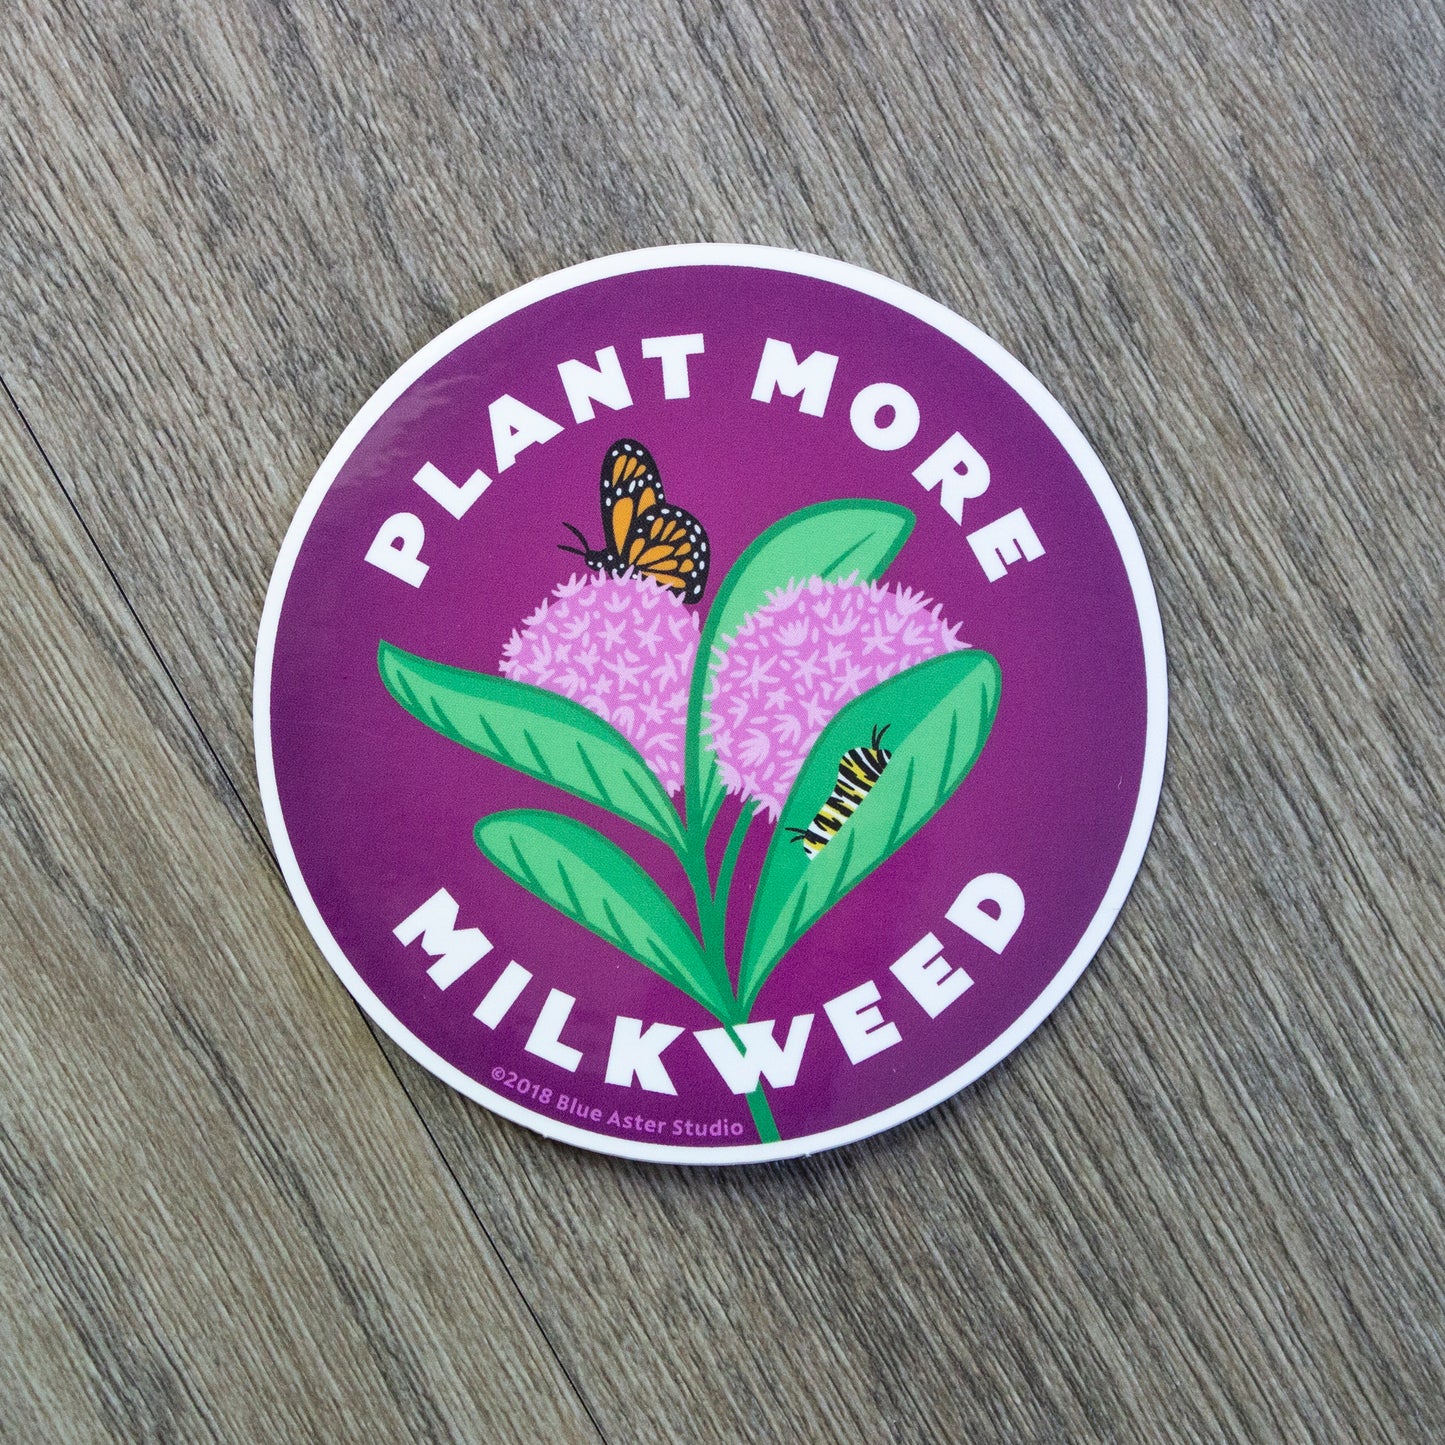 A round vinyl sticker with an illustration of a common milkweed plant in the center and the words Plant More Milkweed around it.